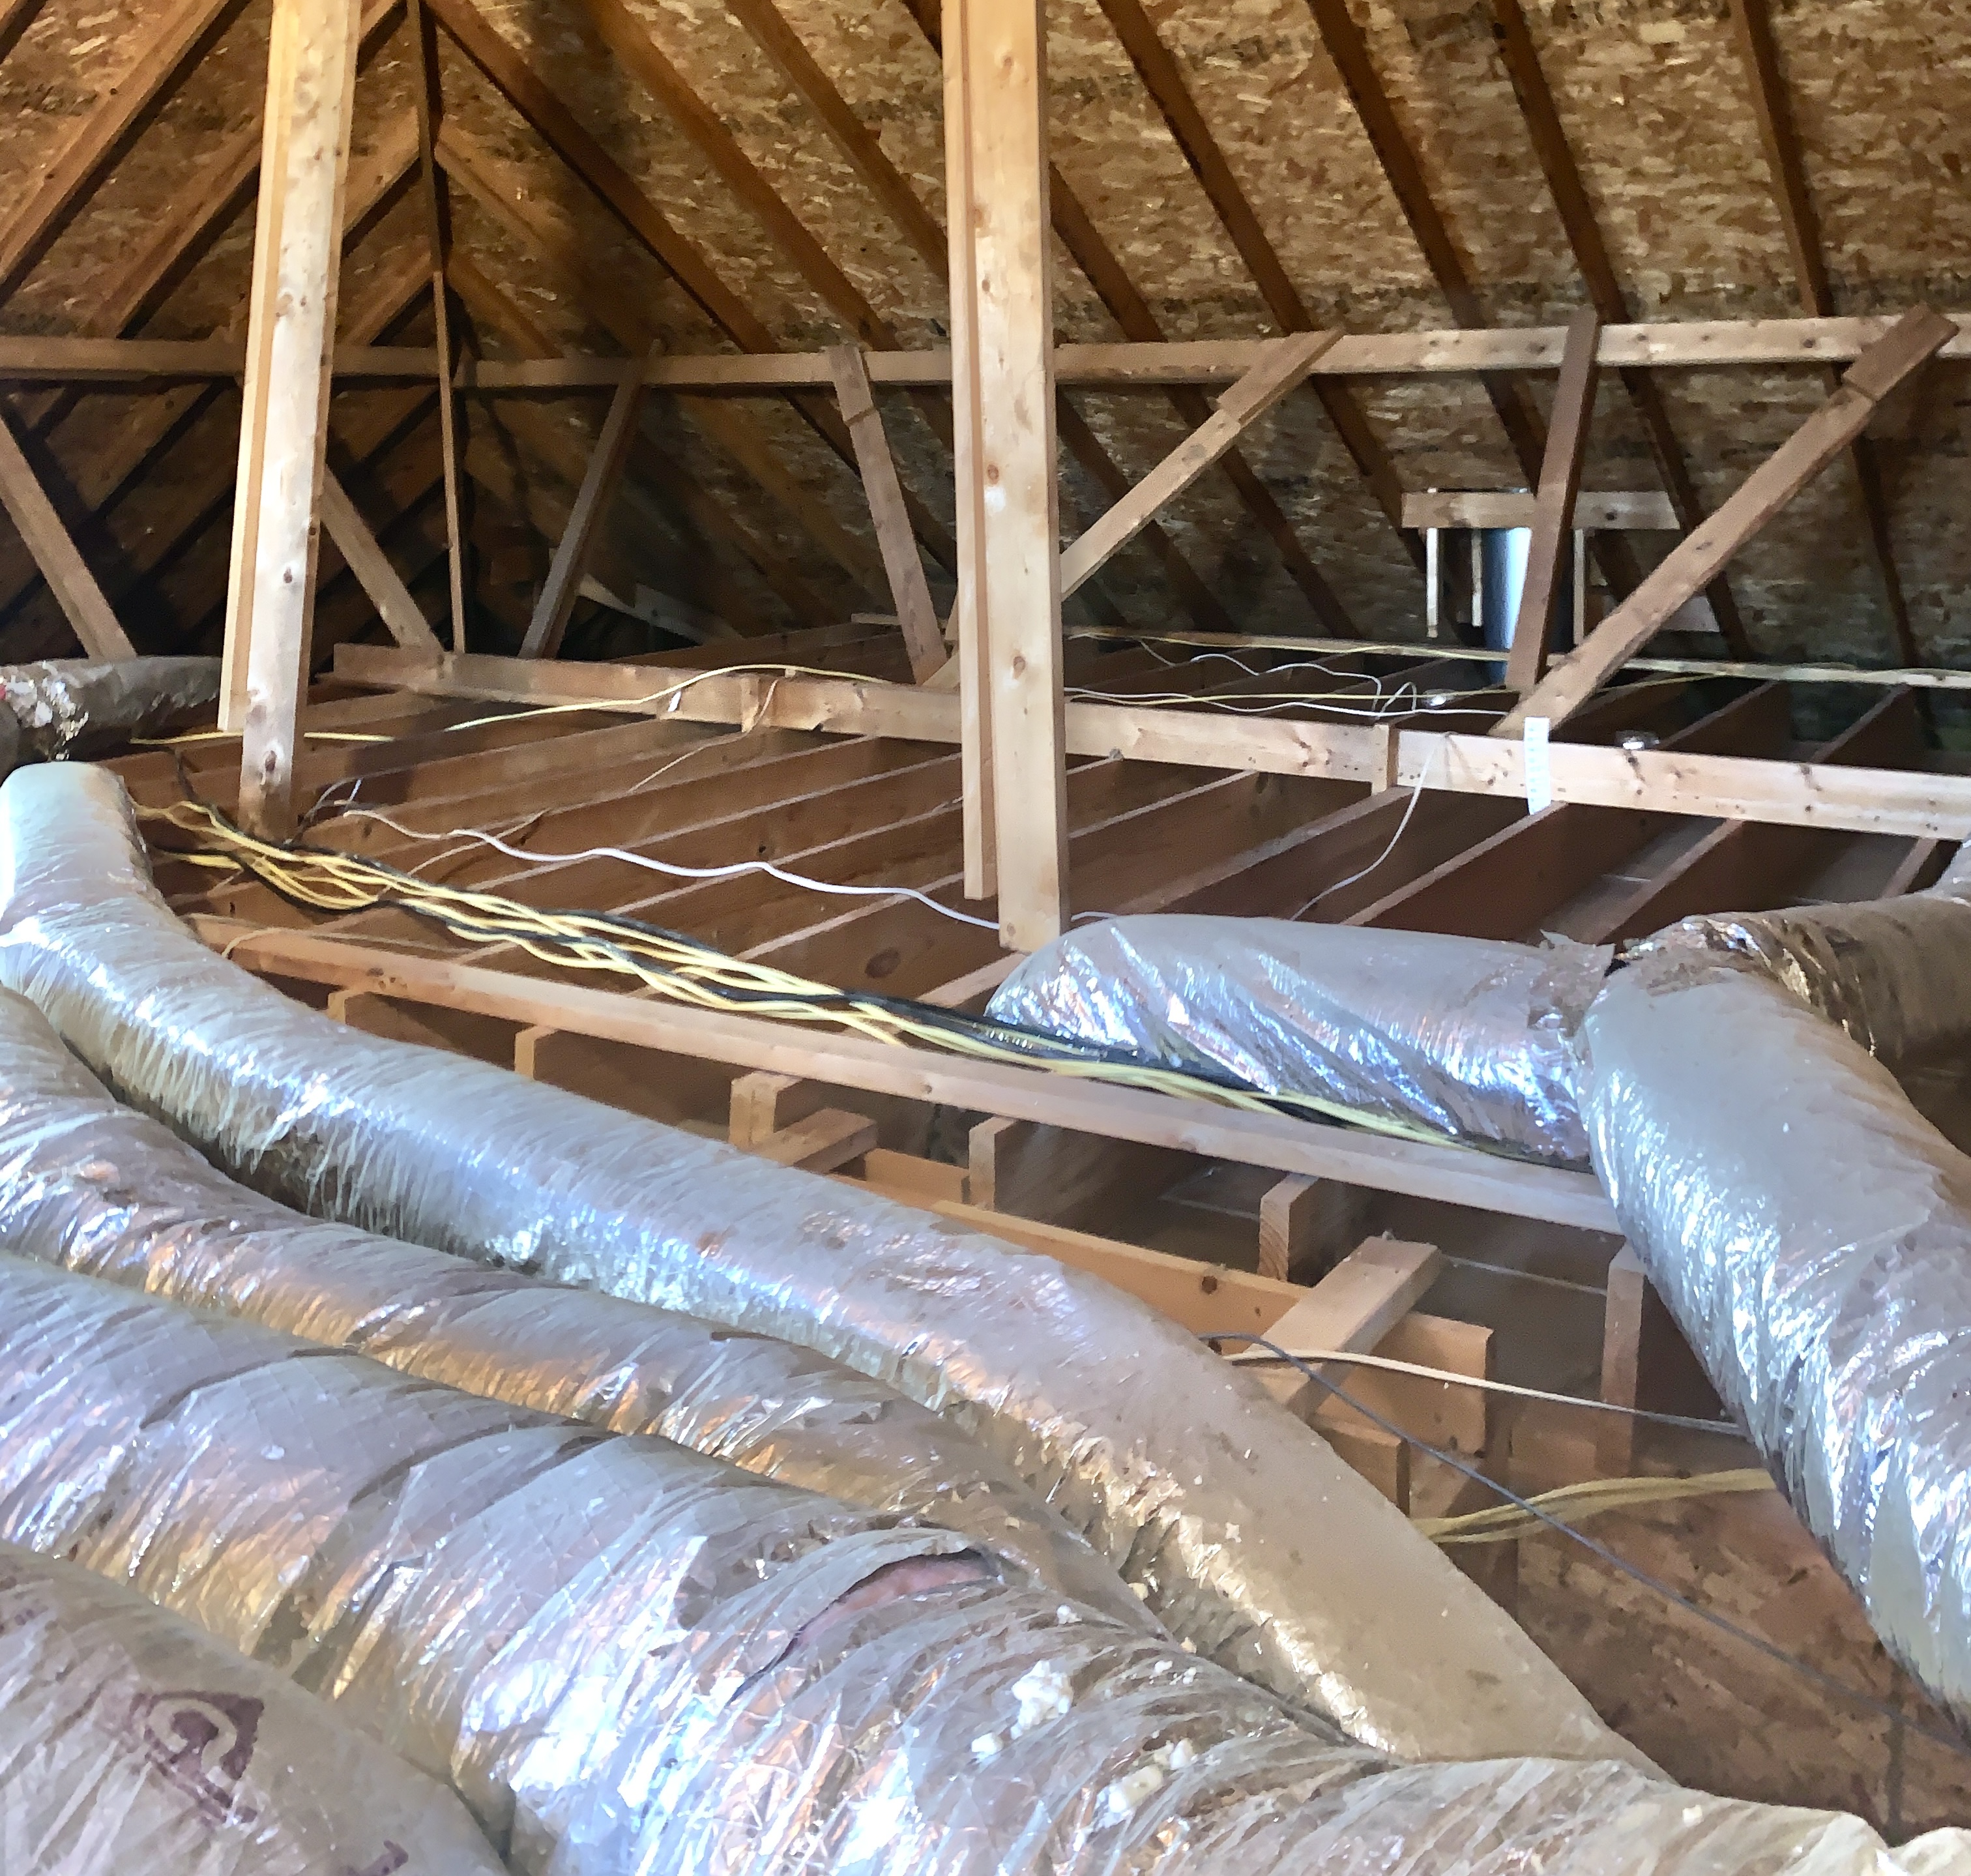 Best Insulation Removal Services by Elite Insulation Specialist - 1712 Almond Dr, Mansfield, TX 76063, United States 18177930629 http://www.eliteinsulationspecialist.com/ https://www.google.com/maps?cid=1454976148324948402